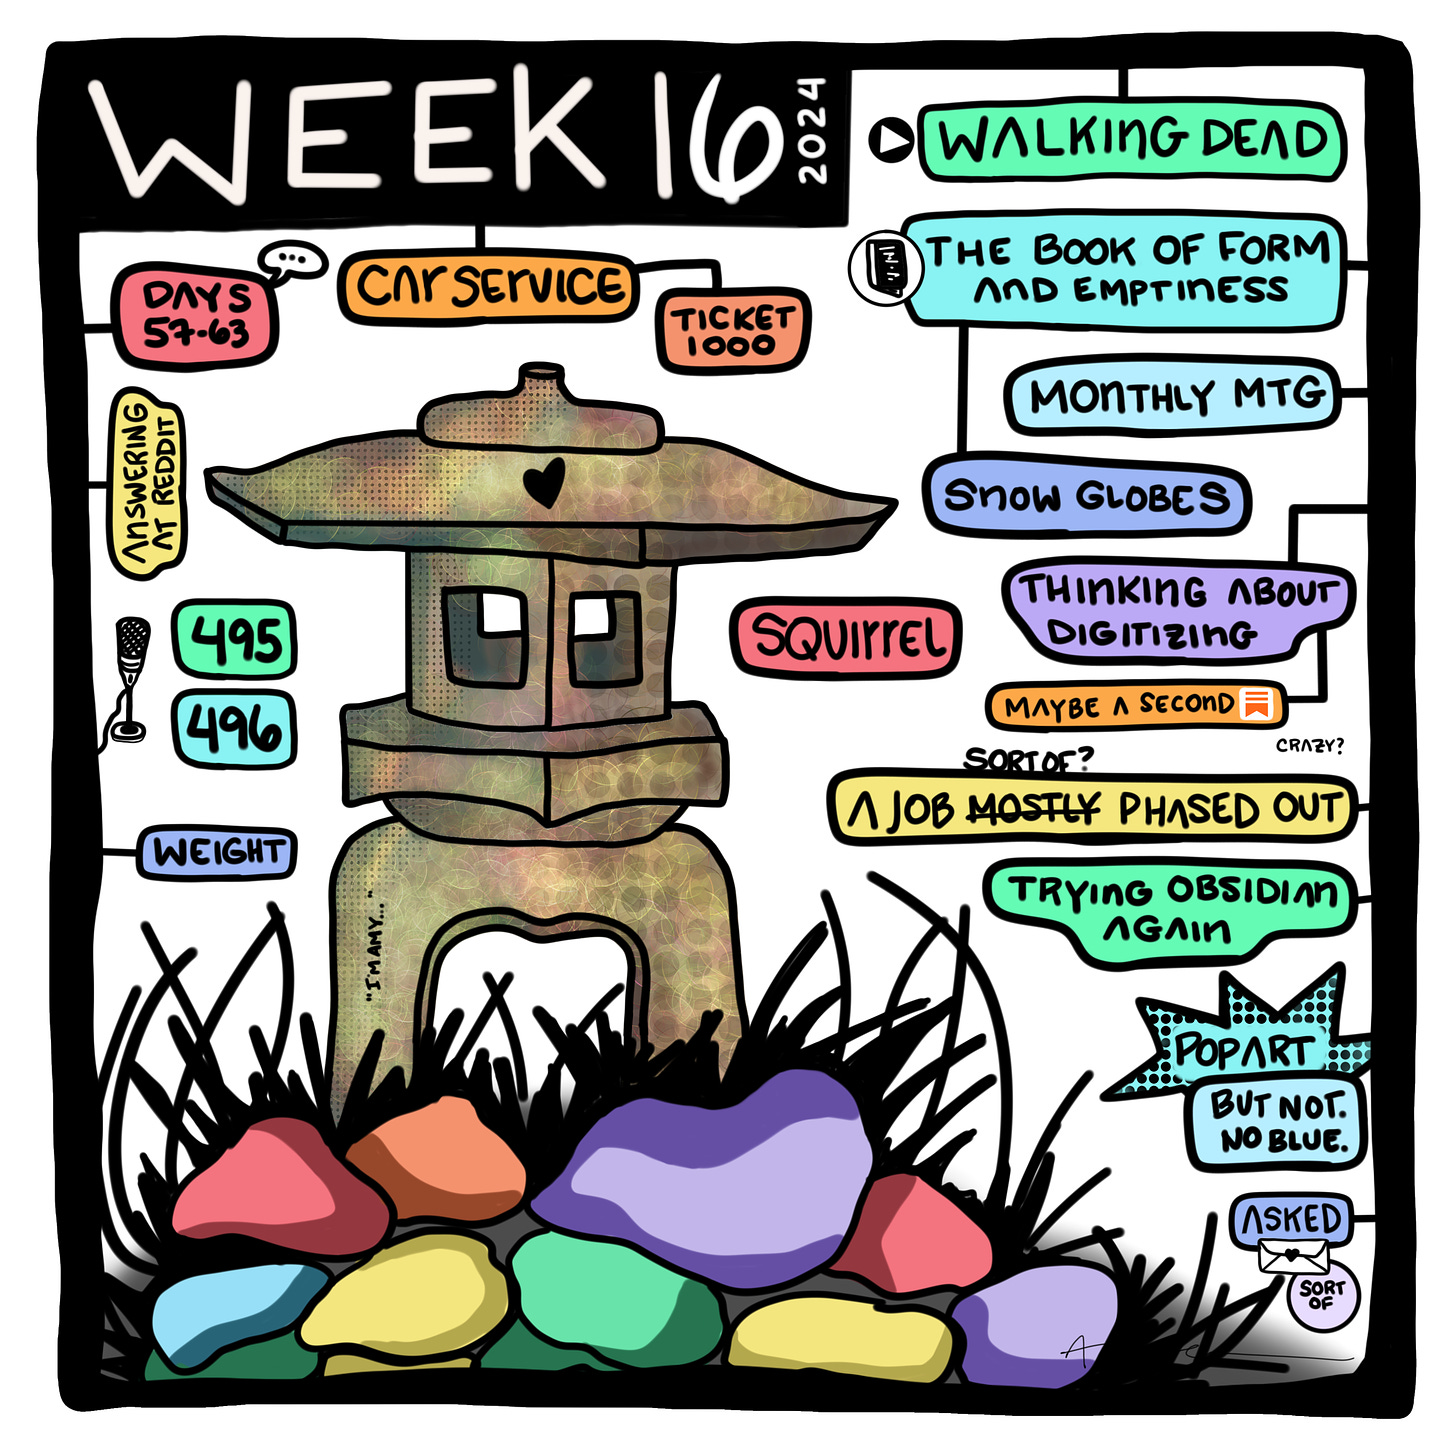 Week 16 list comic with stone lantern drawing. All rights reserved.